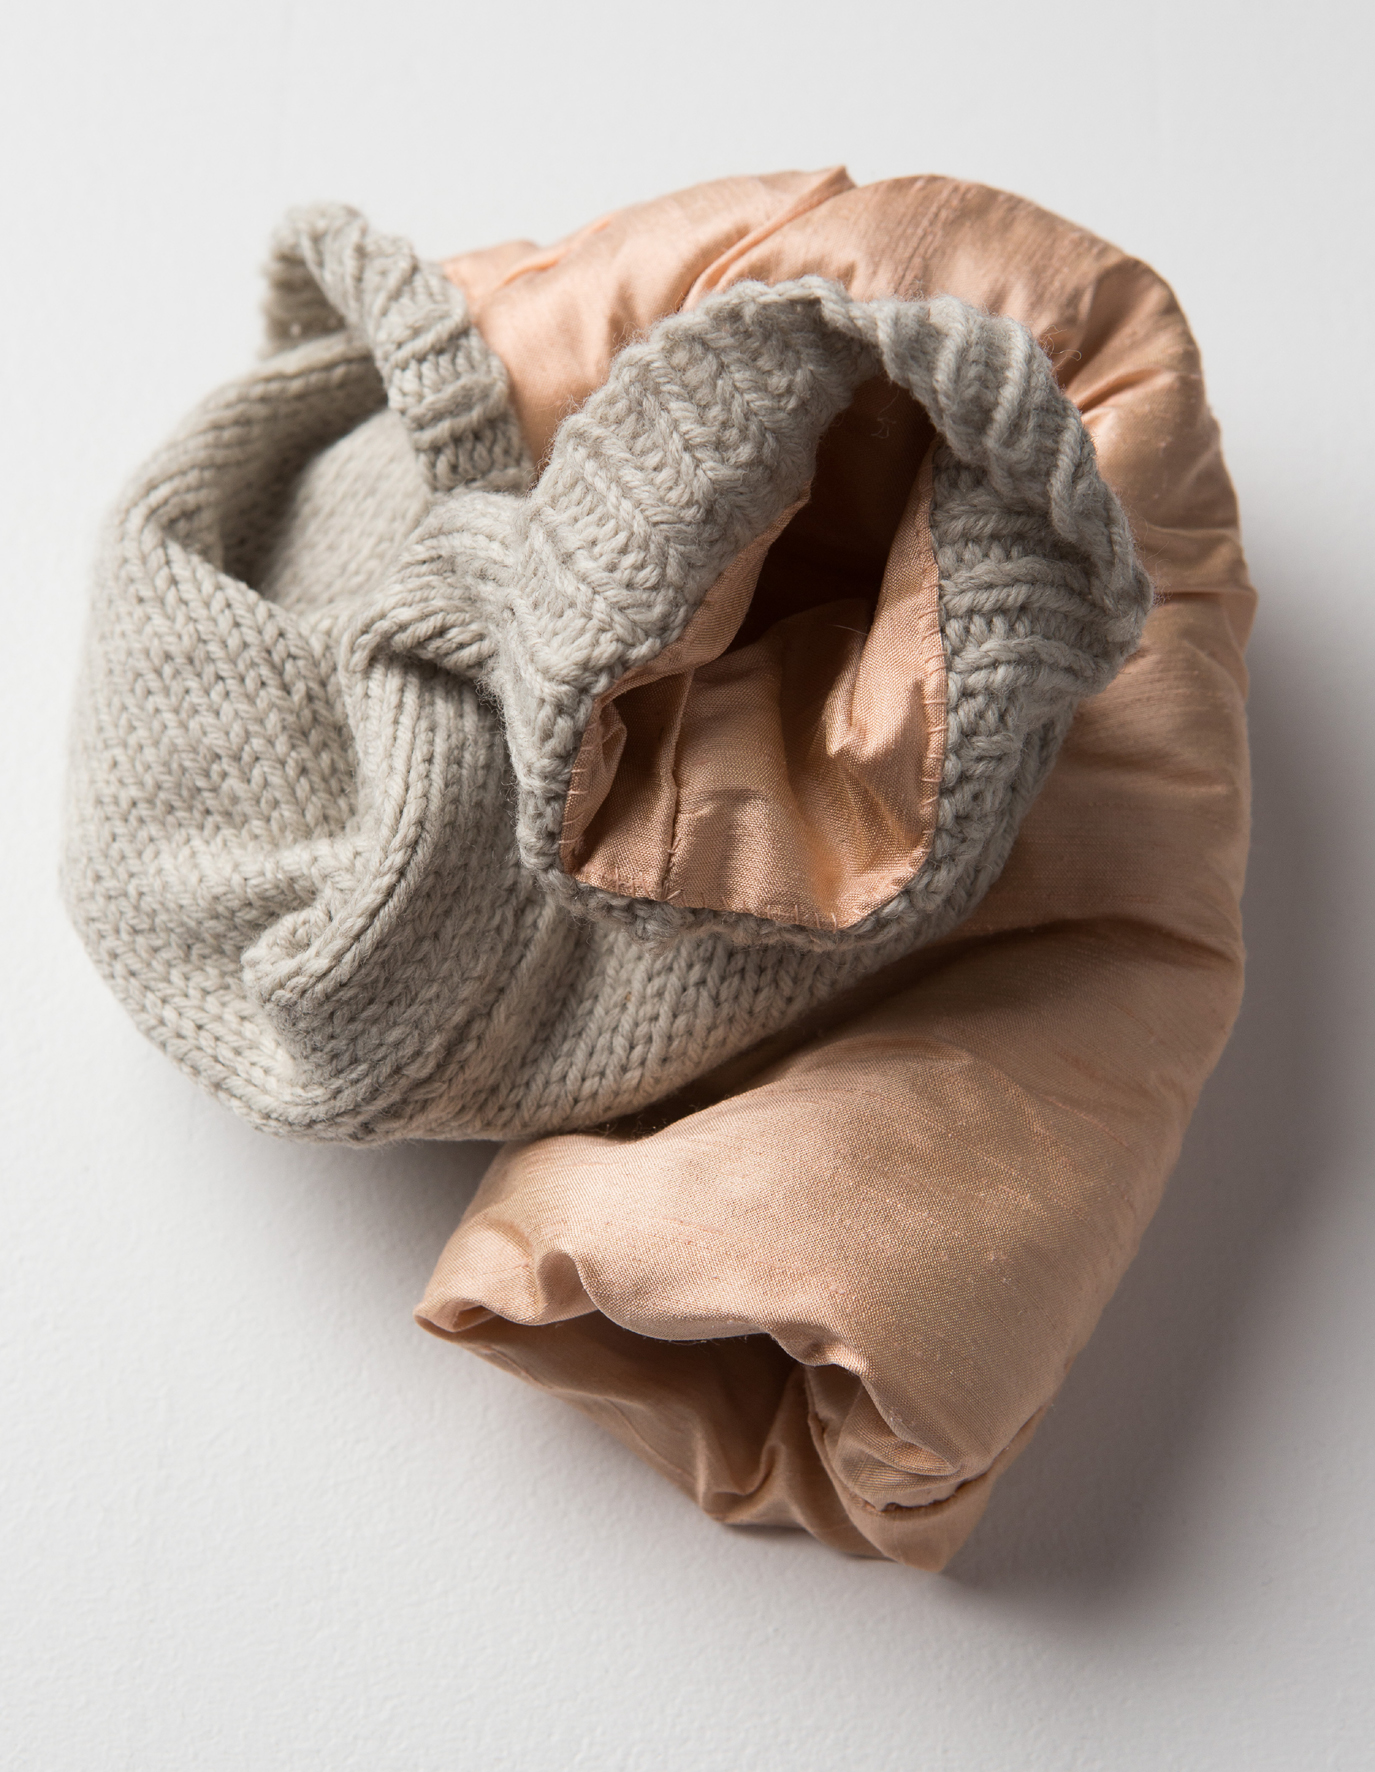  Robyn Finlay,  Untitled  (detail), 2012-13, teabags, 33.5 x 32 x 35 cm. Photograph courtesy the artist. 